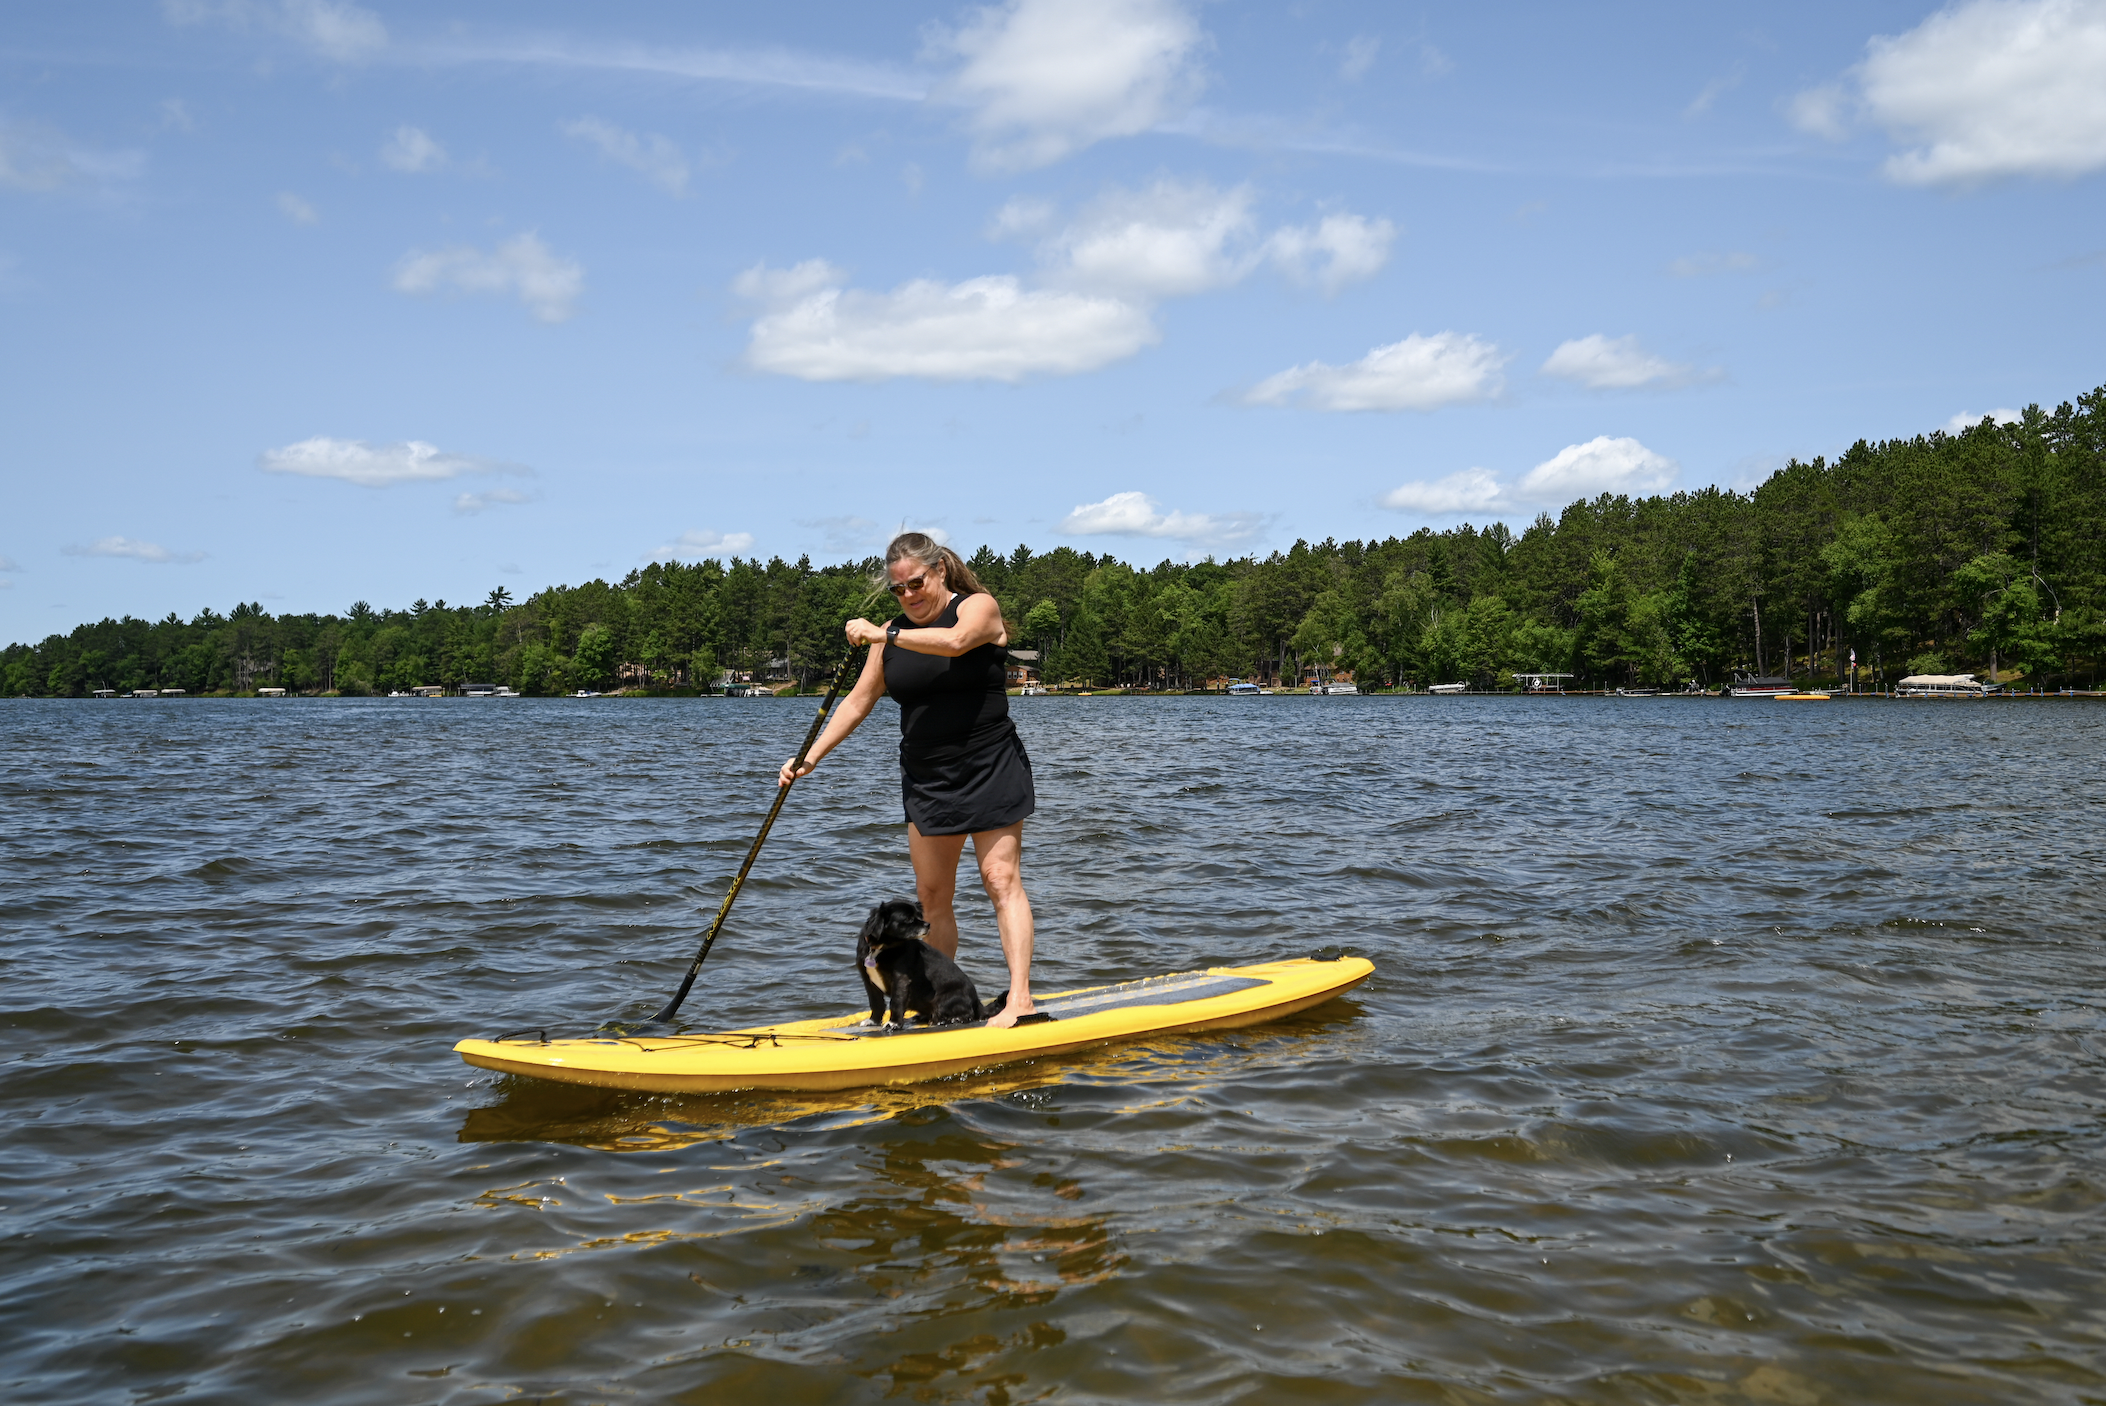 Paddling in St. Germain – How to explore the Northwoods